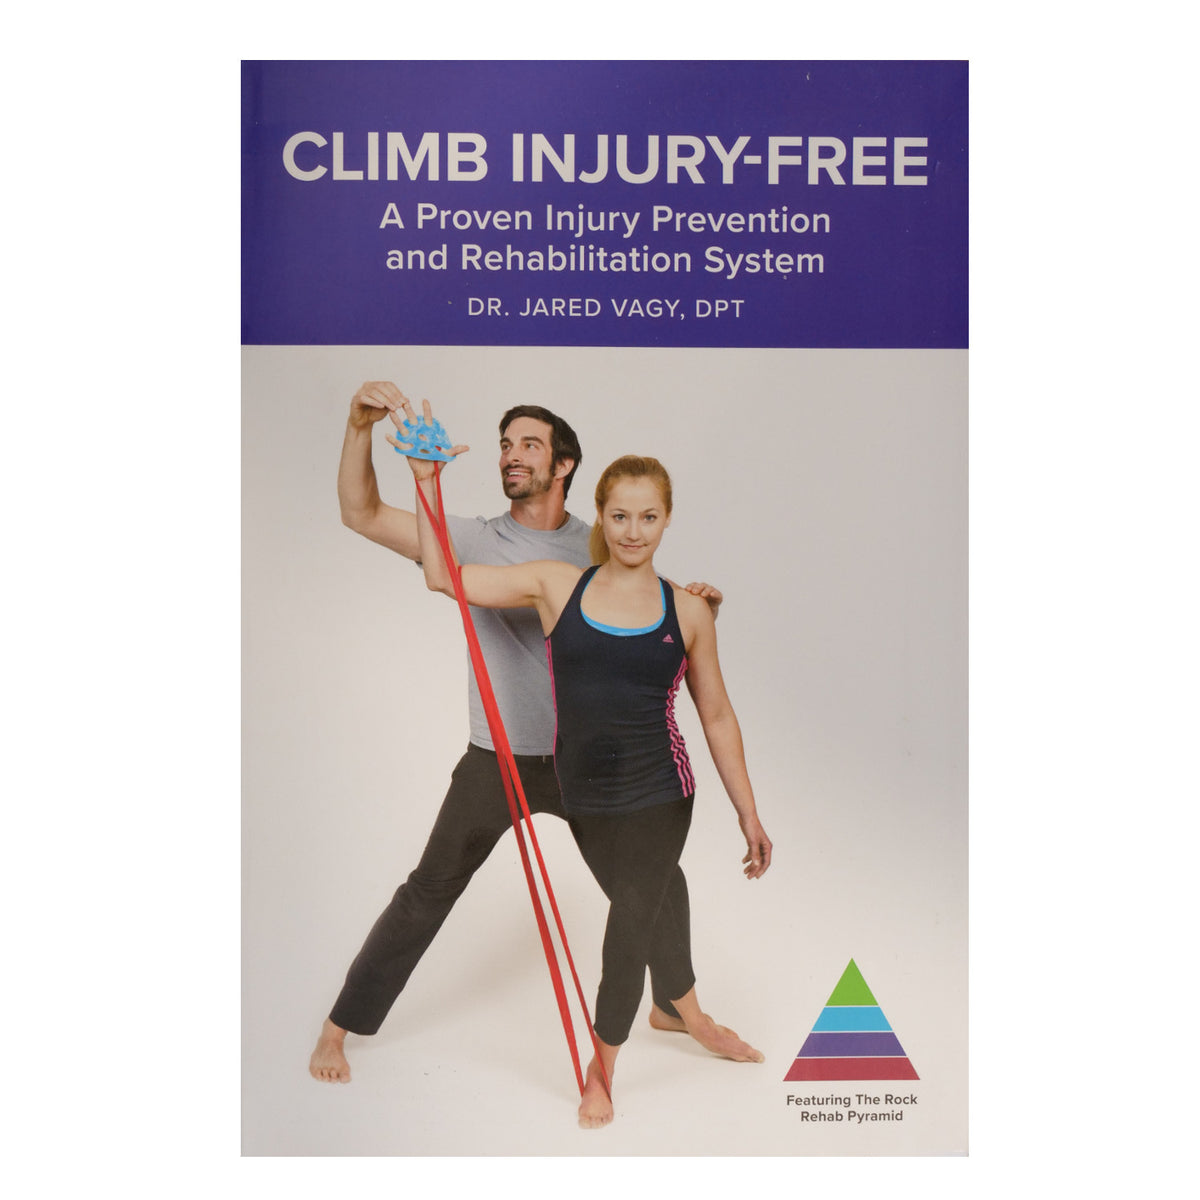 Climb Injury Free book, front cover